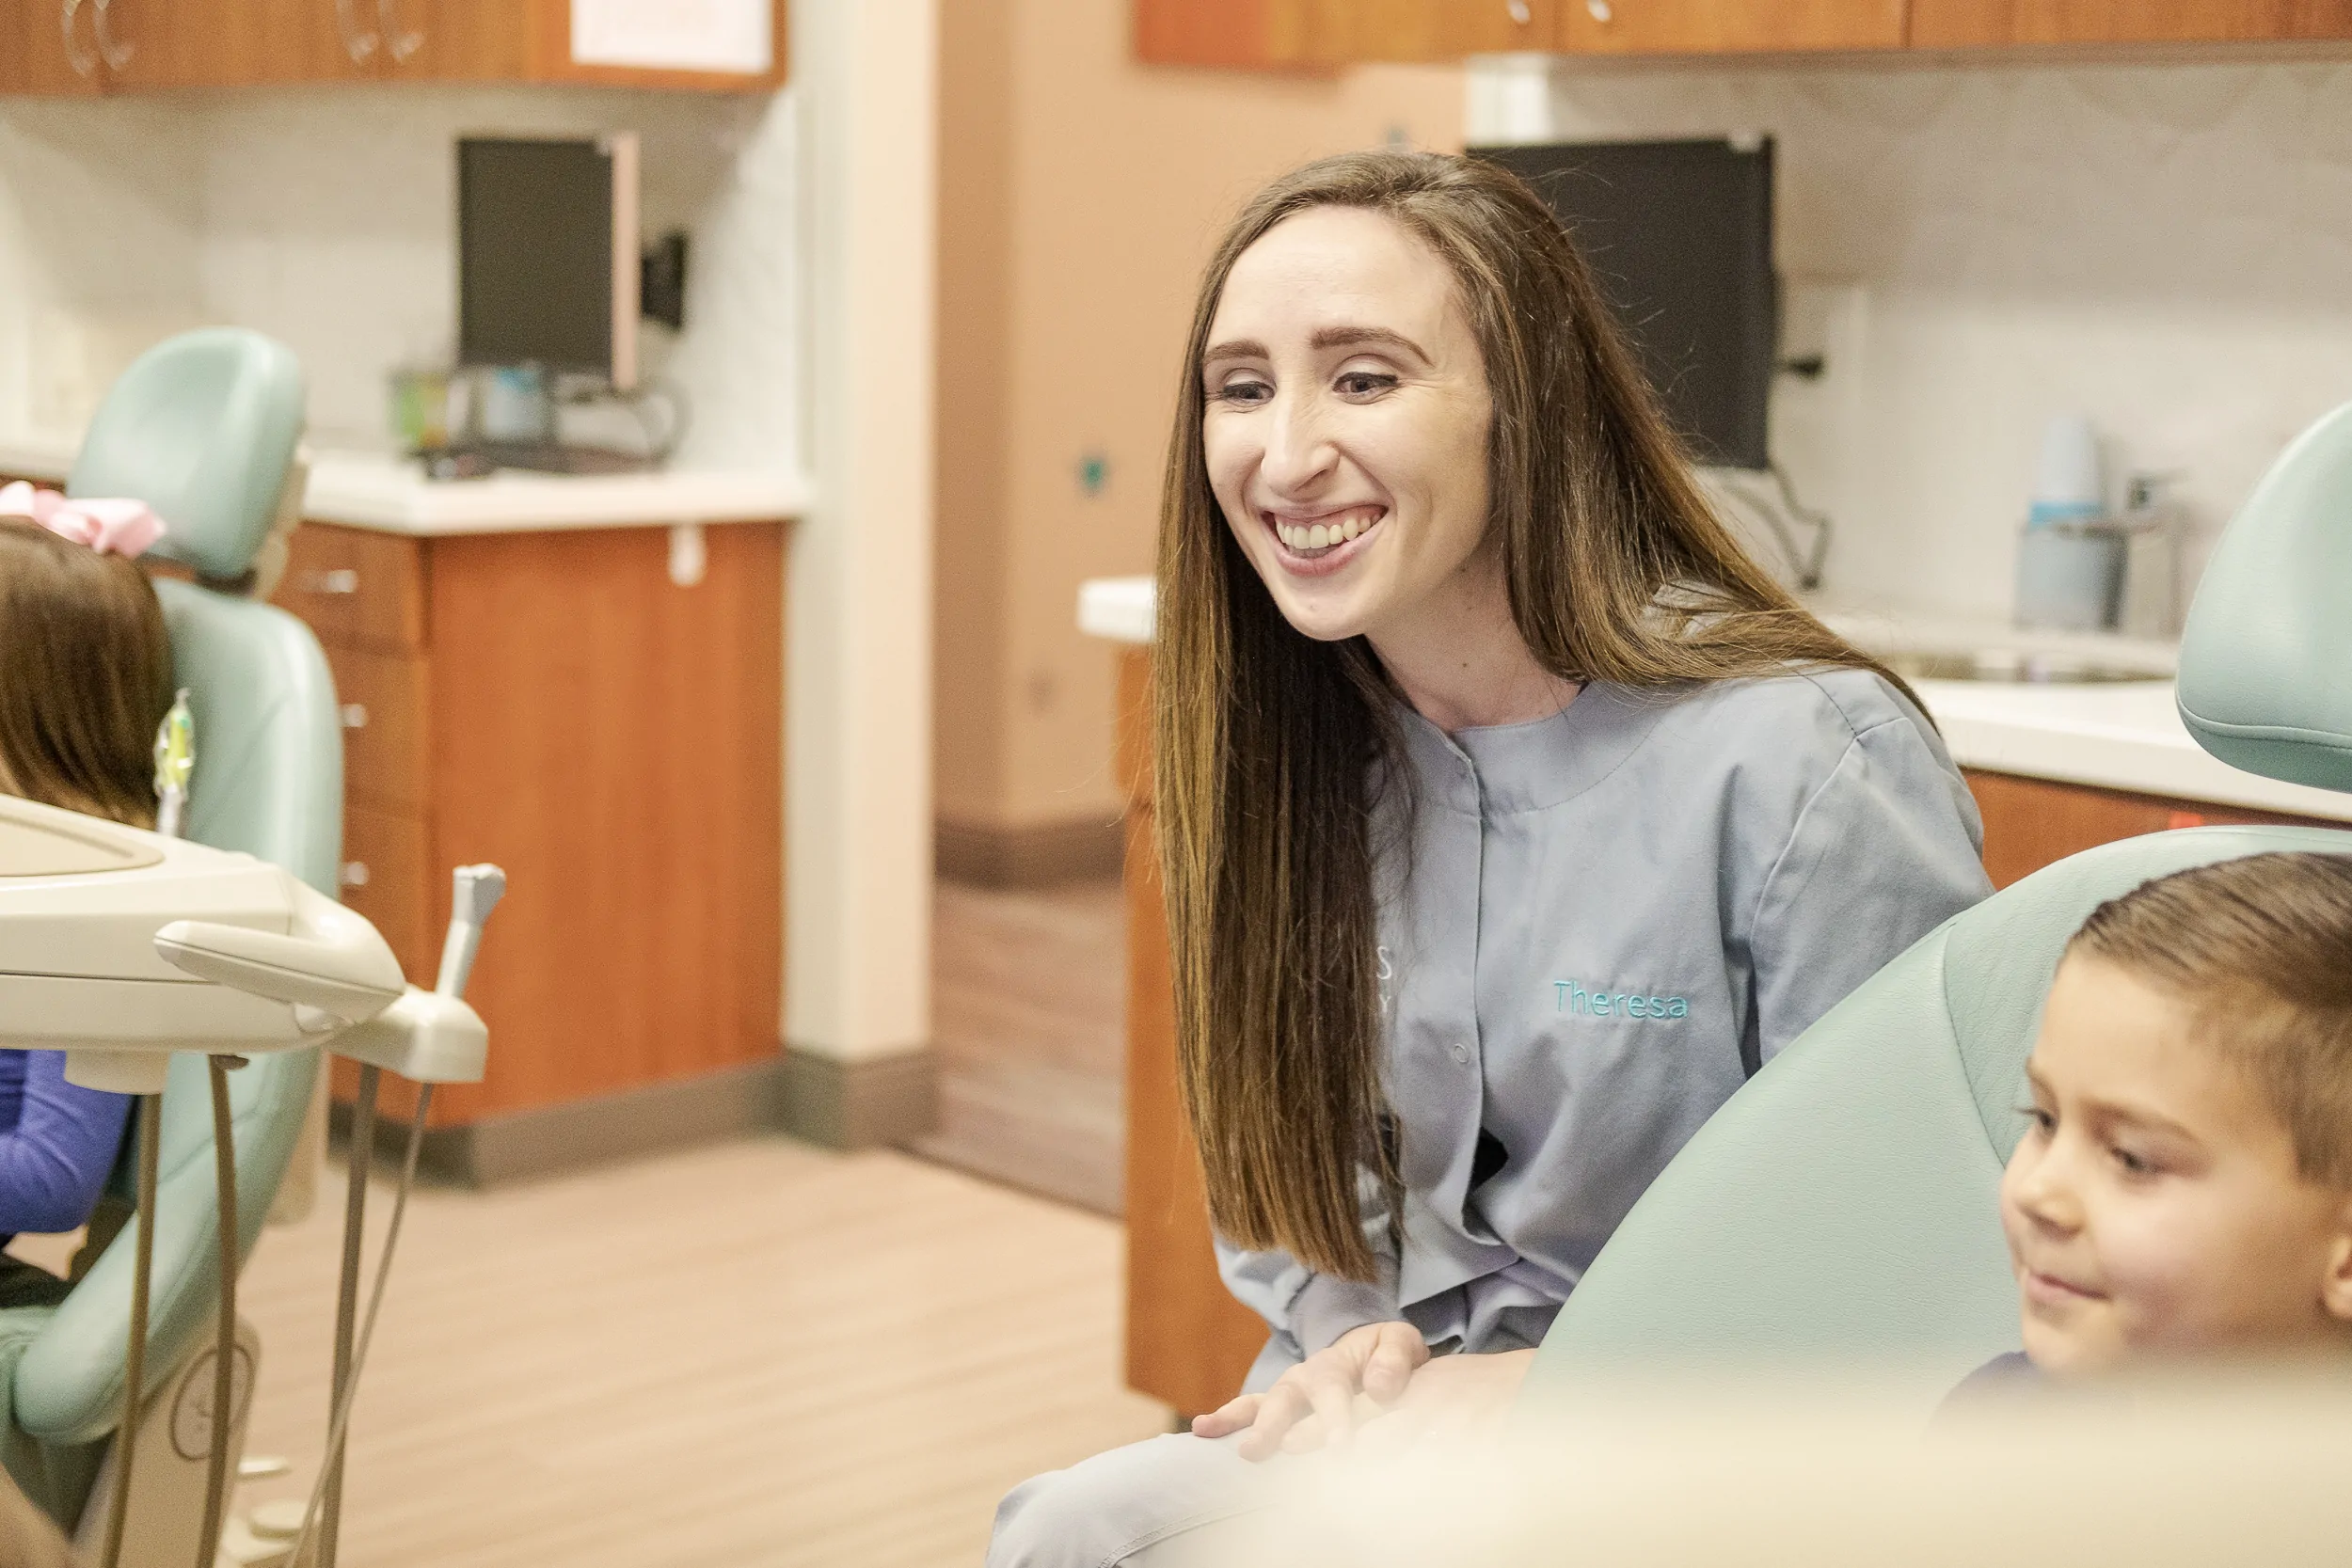 Staff Magic Smiles Dentistry 2019 El Dorado Hills California Dentist 29 - Frequently Asked Questions About COVID-19